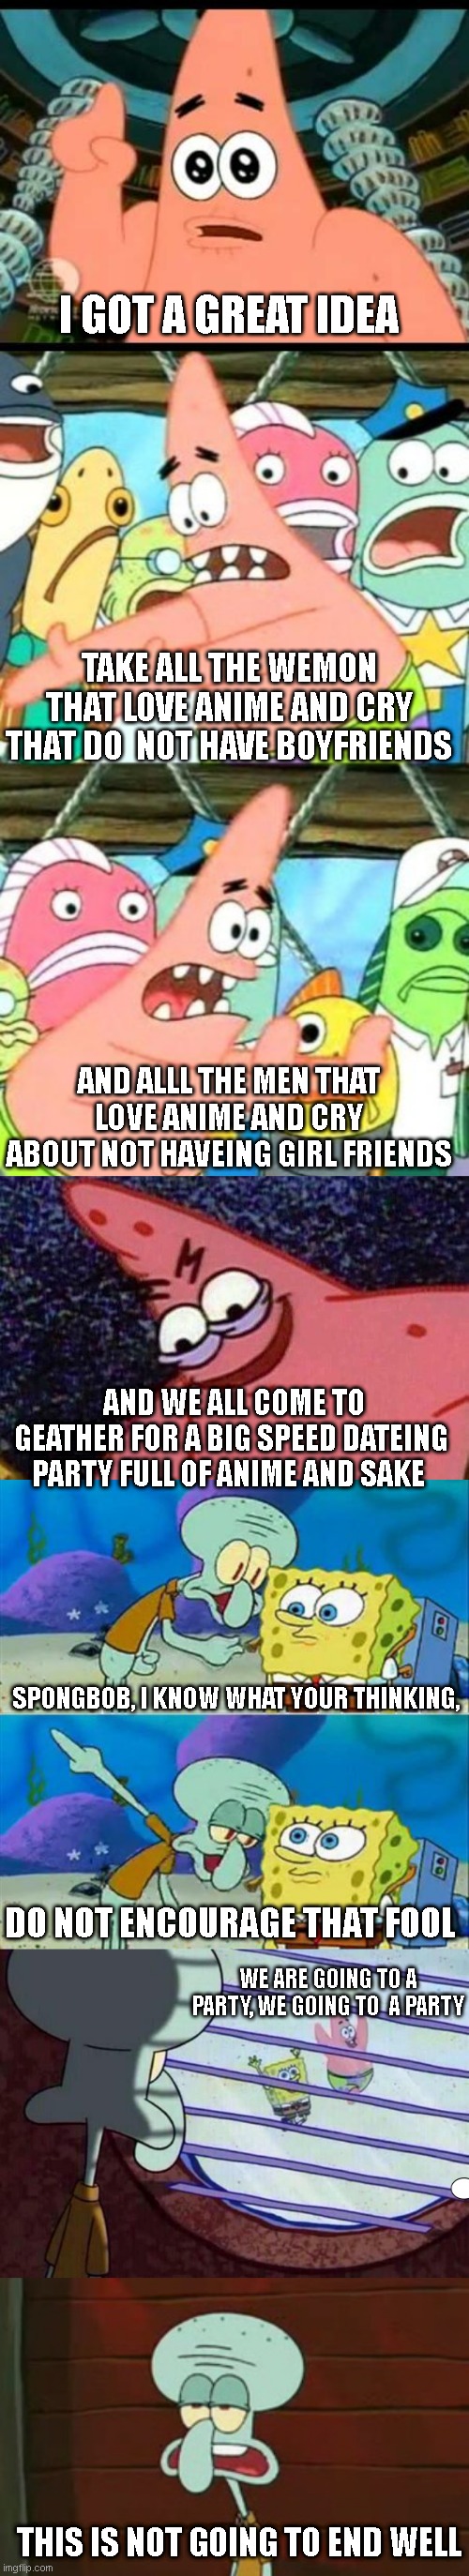 anime fans, should go out with each other instead of complaining. just sayin | I GOT A GREAT IDEA; TAKE ALL THE WEMON THAT LOVE ANIME AND CRY THAT DO  NOT HAVE BOYFRIENDS; AND ALLL THE MEN THAT LOVE ANIME AND CRY ABOUT NOT HAVEING GIRL FRIENDS; AND WE ALL COME TO GEATHER FOR A BIG SPEED DATEING PARTY FULL OF ANIME AND SAKE; SPONGBOB, I KNOW WHAT YOUR THINKING, DO NOT ENCOURAGE THAT FOOL; WE ARE GOING TO A PARTY, WE GOING TO  A PARTY; THIS IS NOT GOING TO END WELL | image tagged in memes,patrick says,put it somewhere else patrick,evil patrick,talk to spongebob,squidward window | made w/ Imgflip meme maker